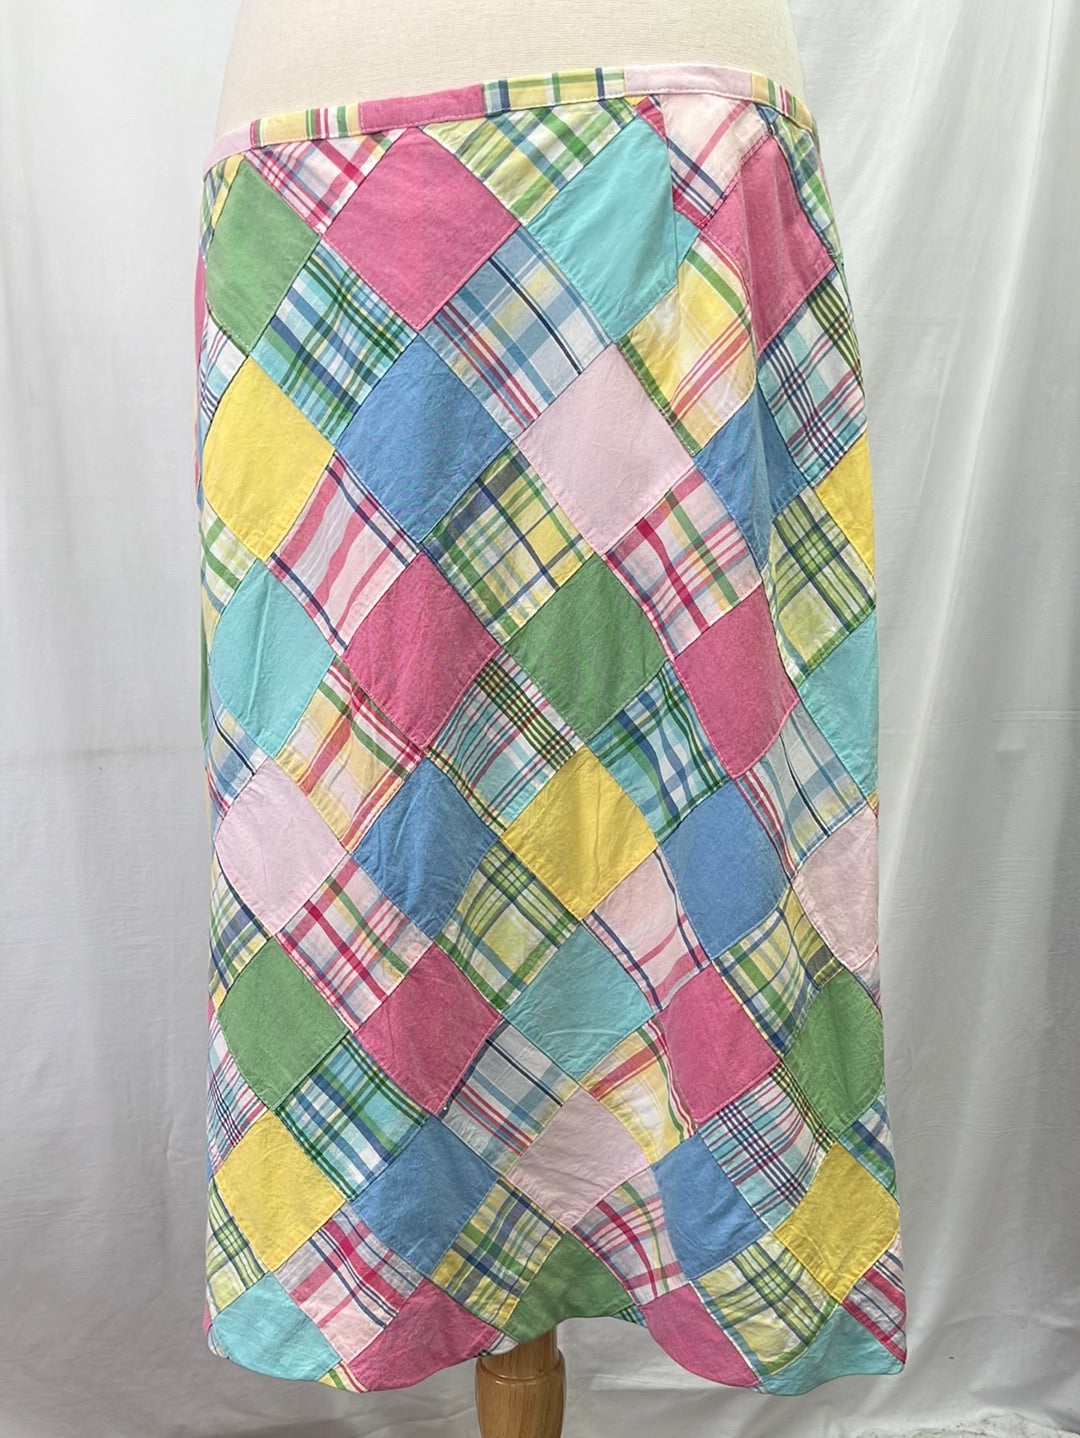 NWOT -- BROOKS BROTHER'S "346" Pastel Quilted Flared Midi Skirt -- Size 12